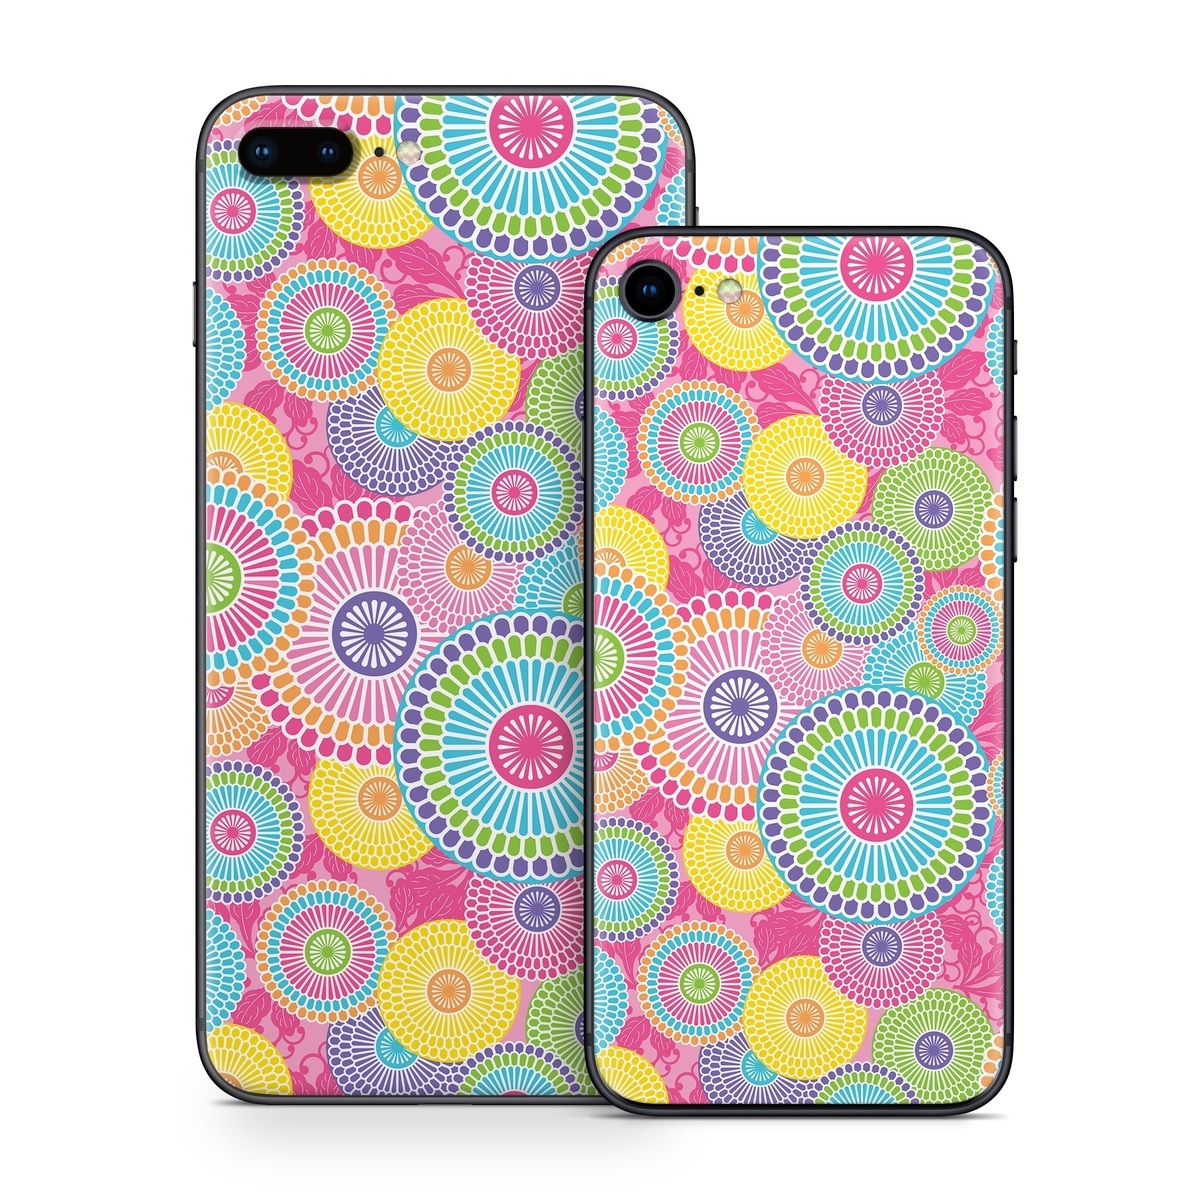 iPhone 8 Series Skin design of Pattern, Circle, Textile, Design, Visual arts, Wrapping paper, with gray, pink, purple, orange, blue, green colors